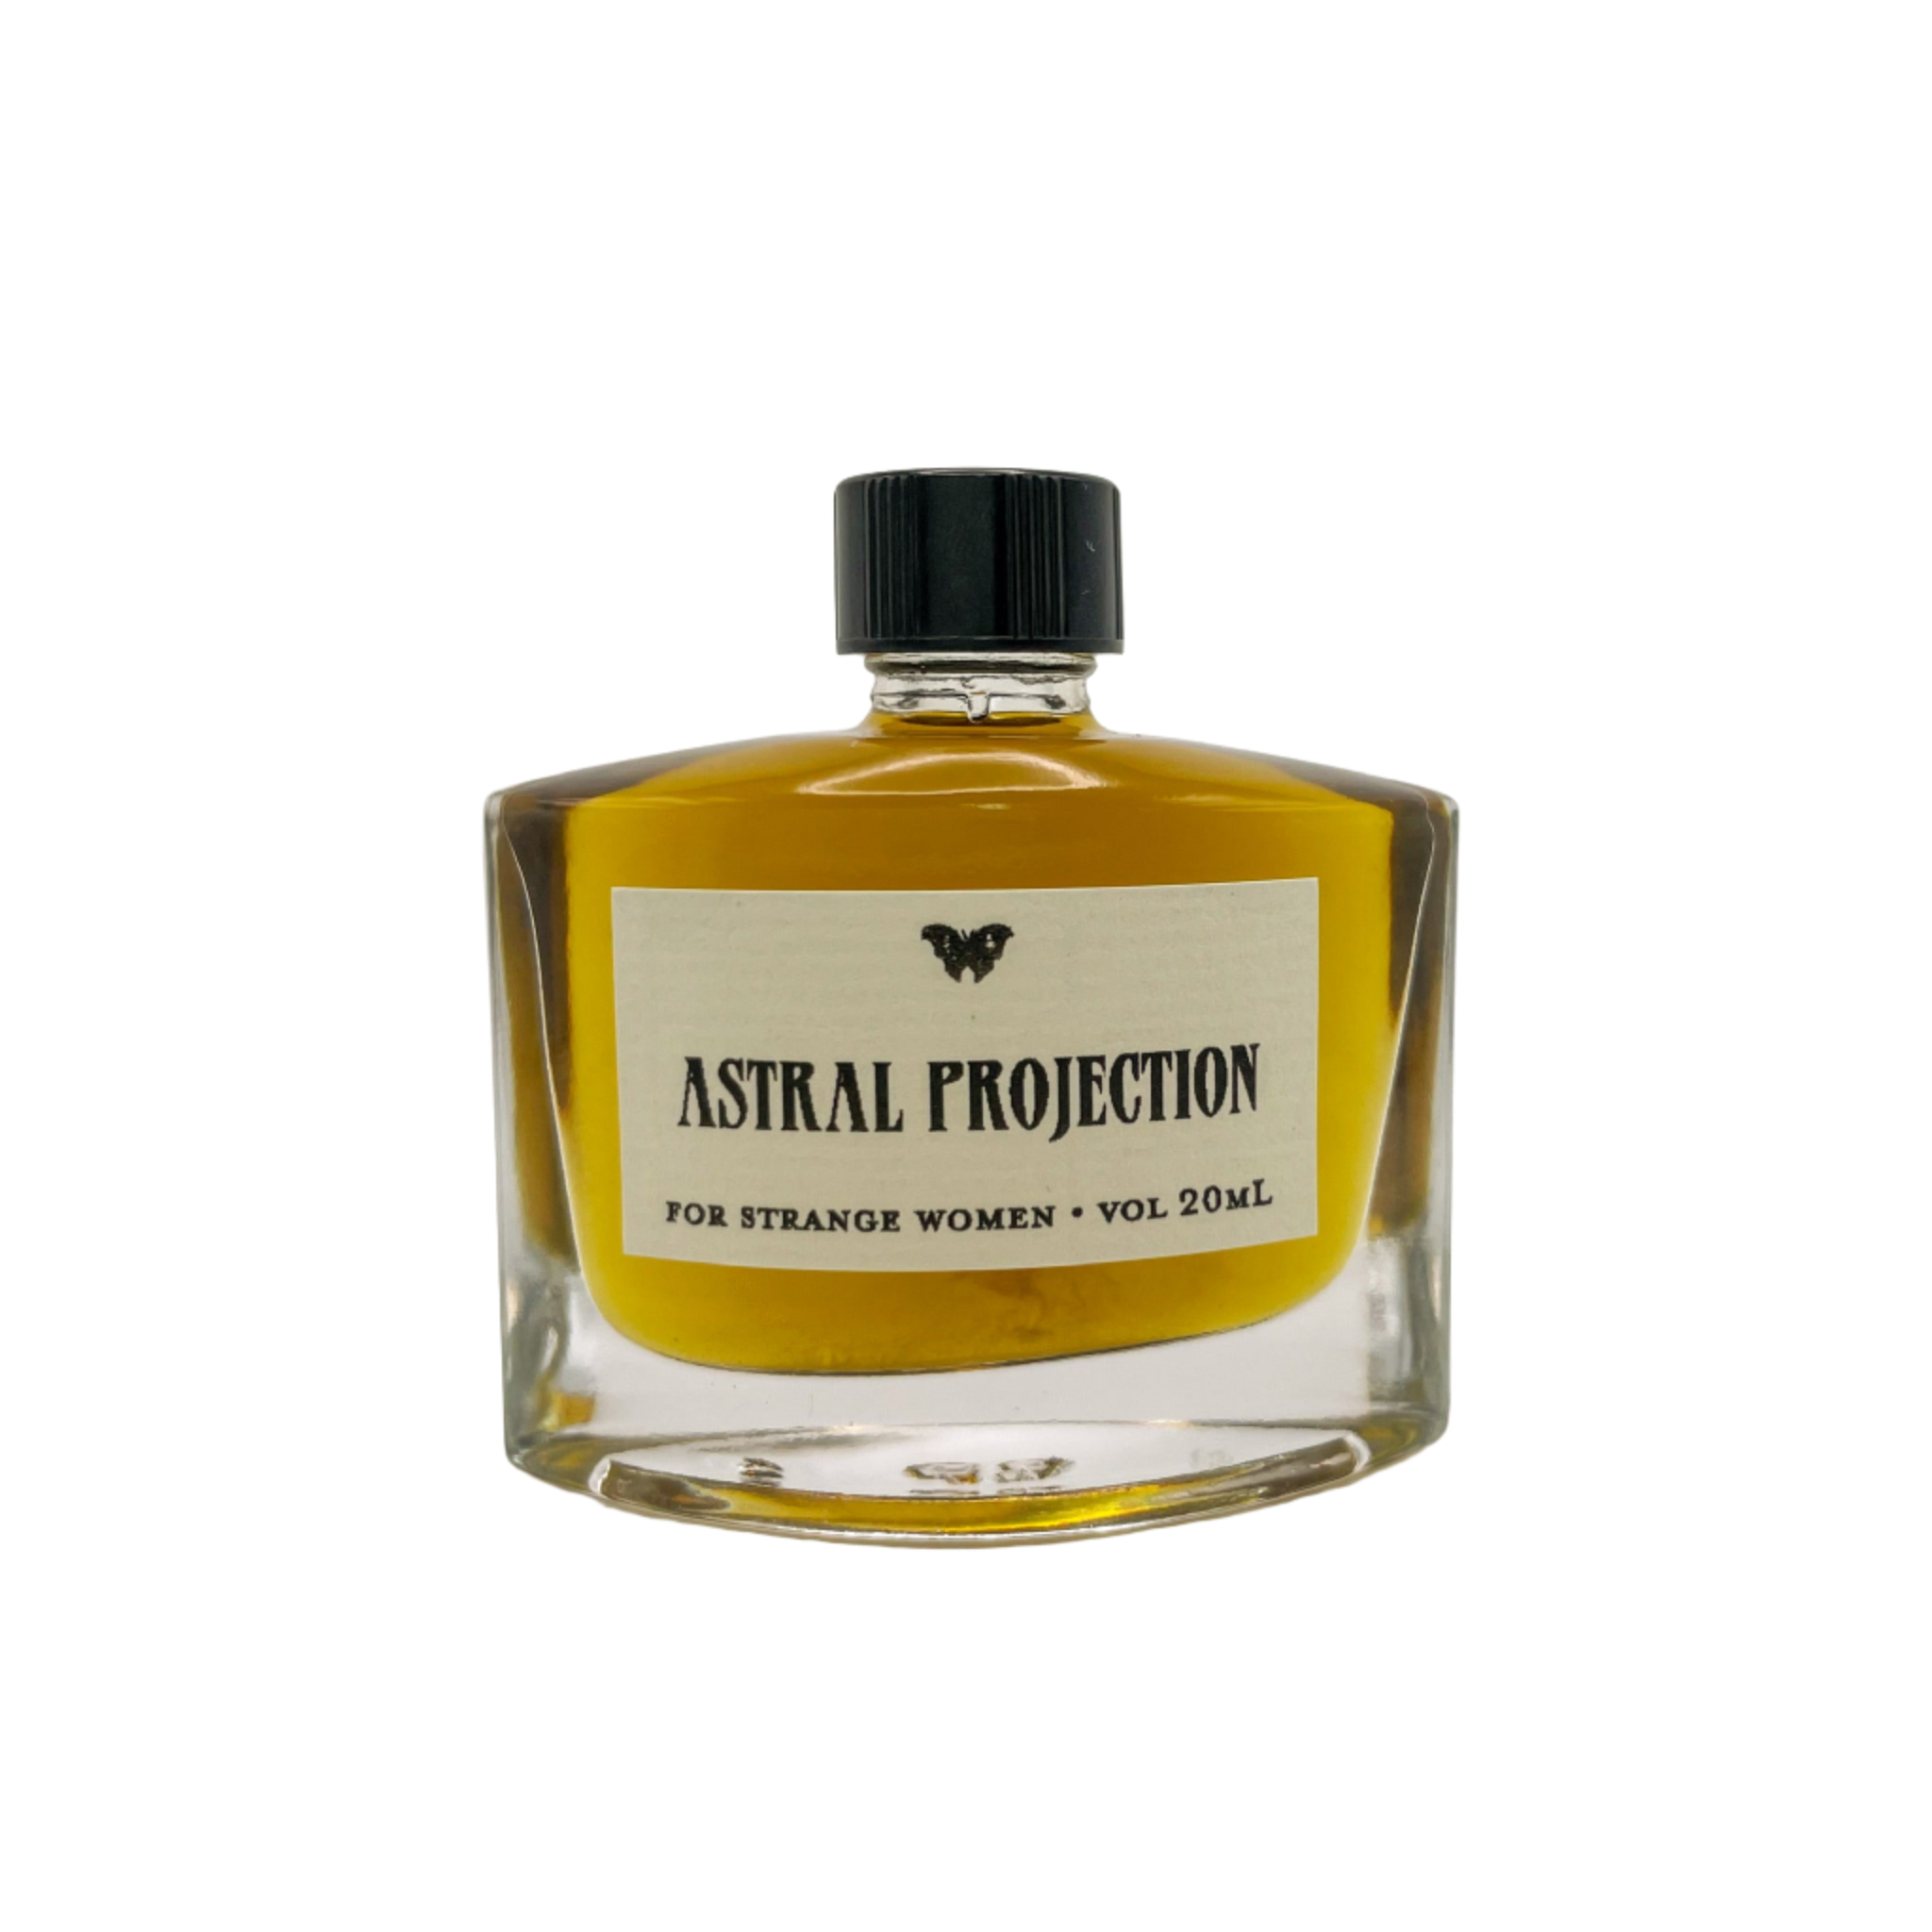 Astral Projection - Perfume Oil